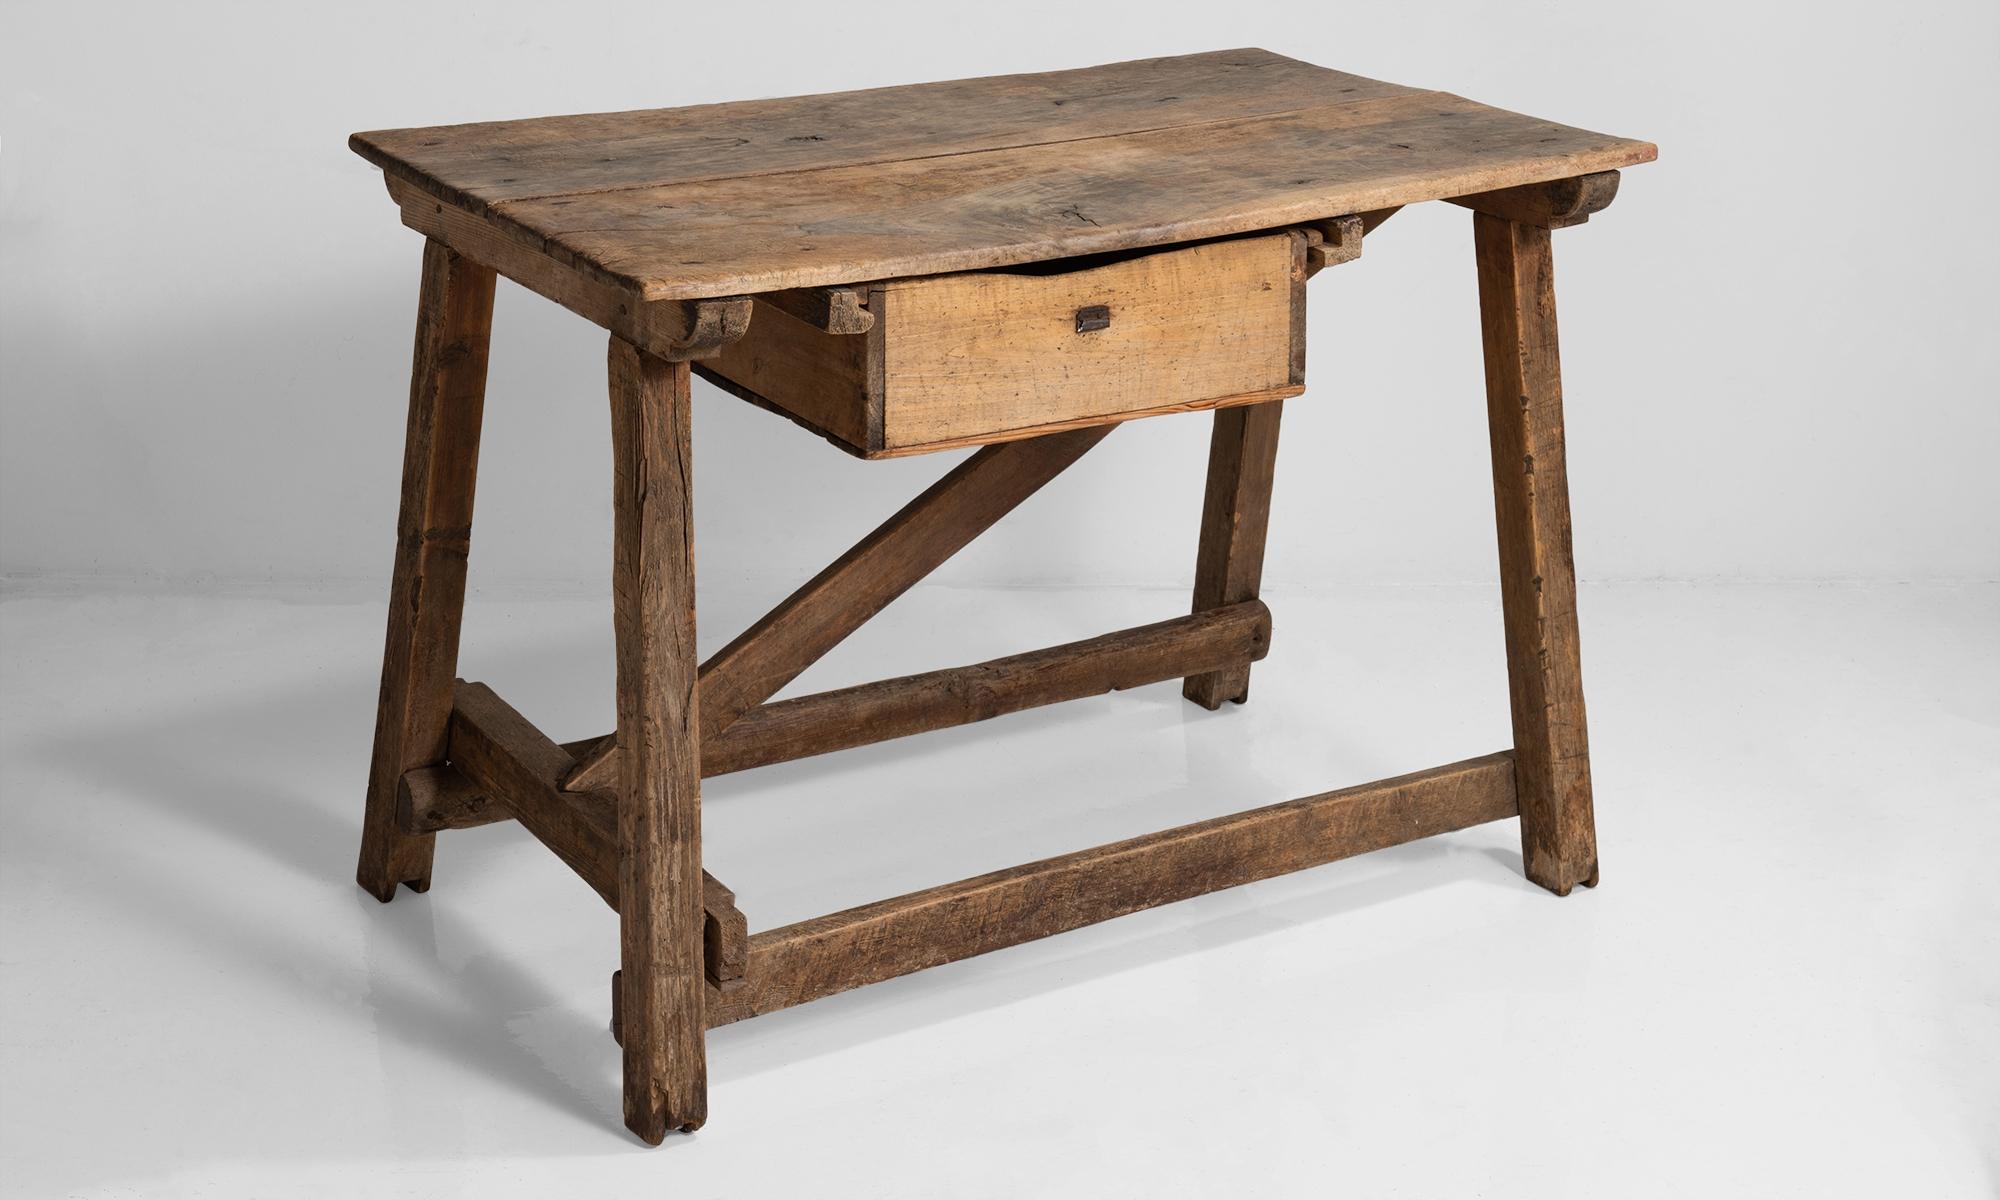 Primitive work table, Netherlands, 19th century.

Unique worktable with pullout drawer and asymmetrical construction.